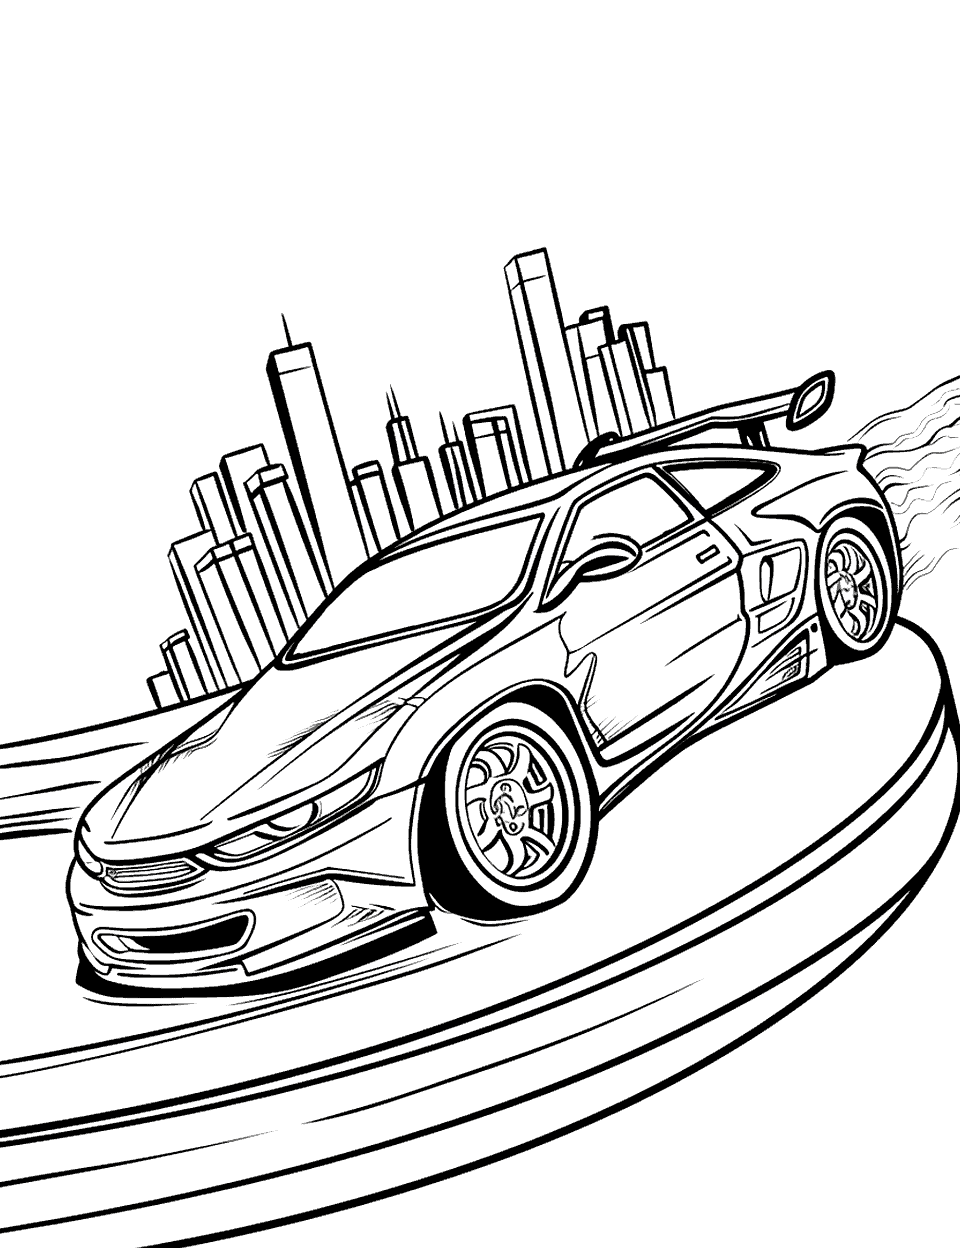 City Skyline Drift Coloring Page - A Hot Wheels car drifting around a corner with a city skyline in the background.